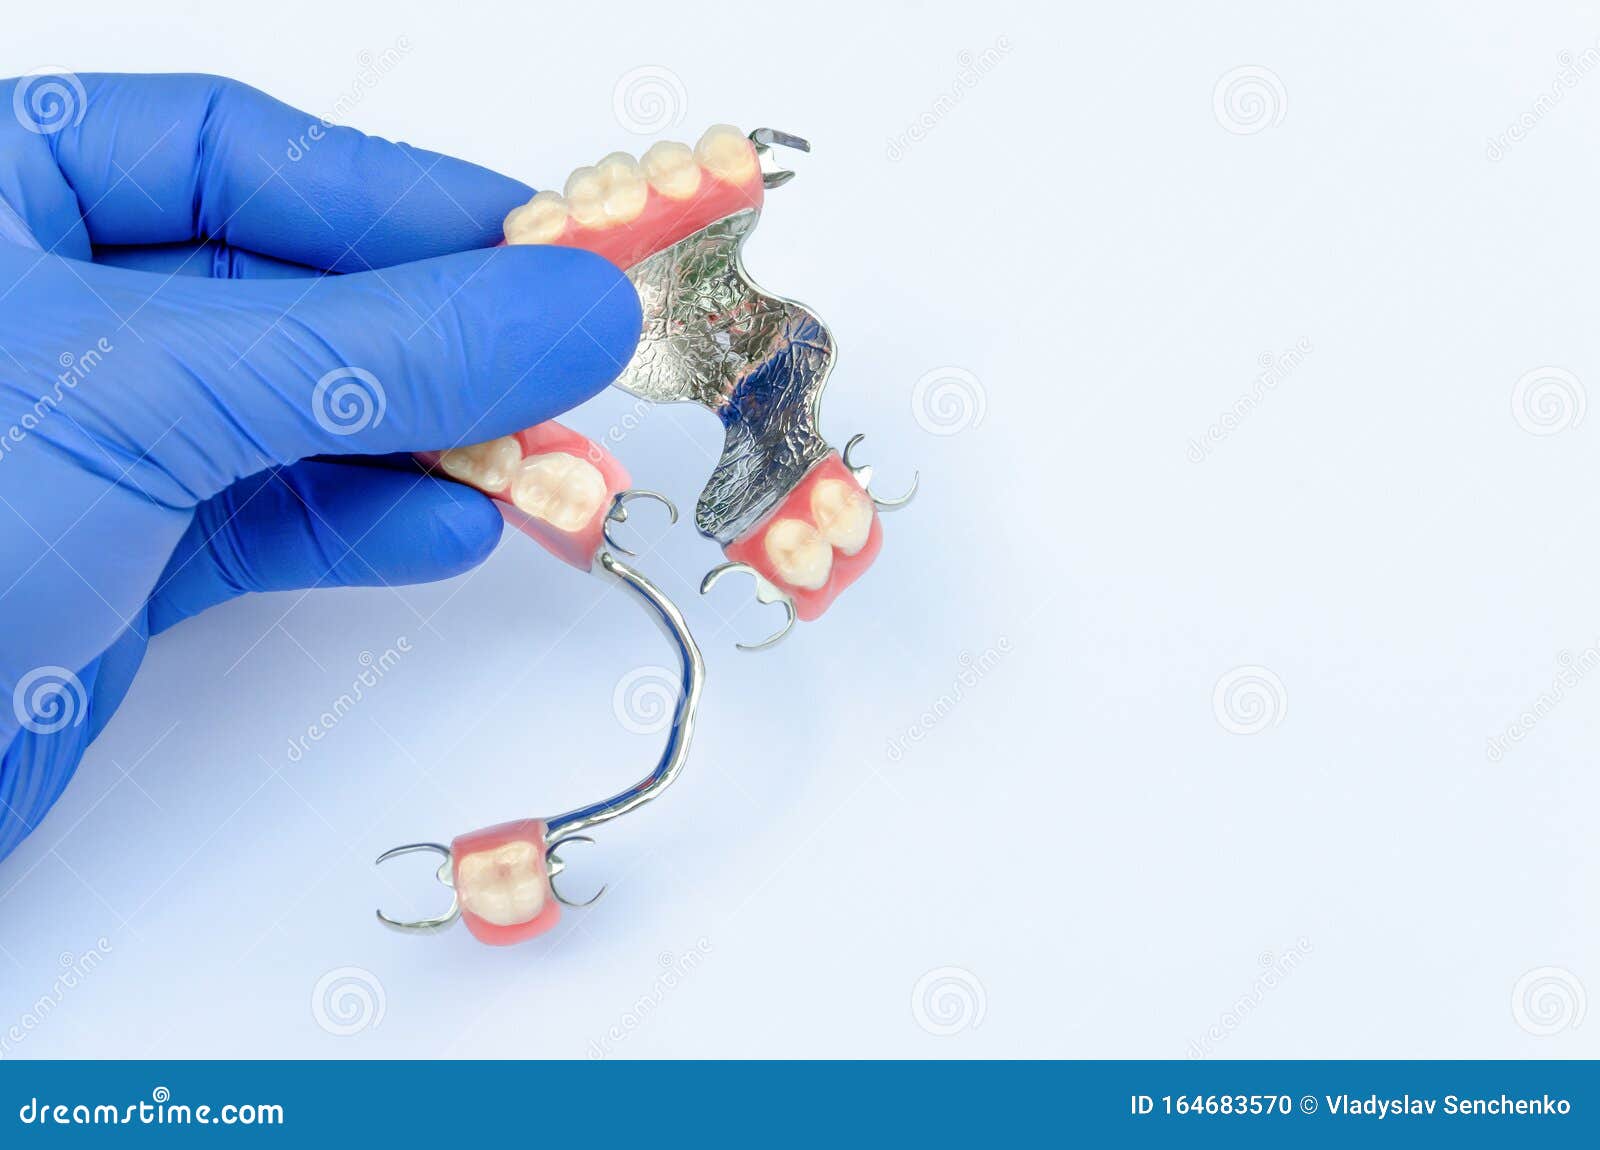 orthopedic dentistry. prosthetics concept with removable dentures. a dentistÃ¢â¬â¢s hand in a glove holds a set of clasp prostheses